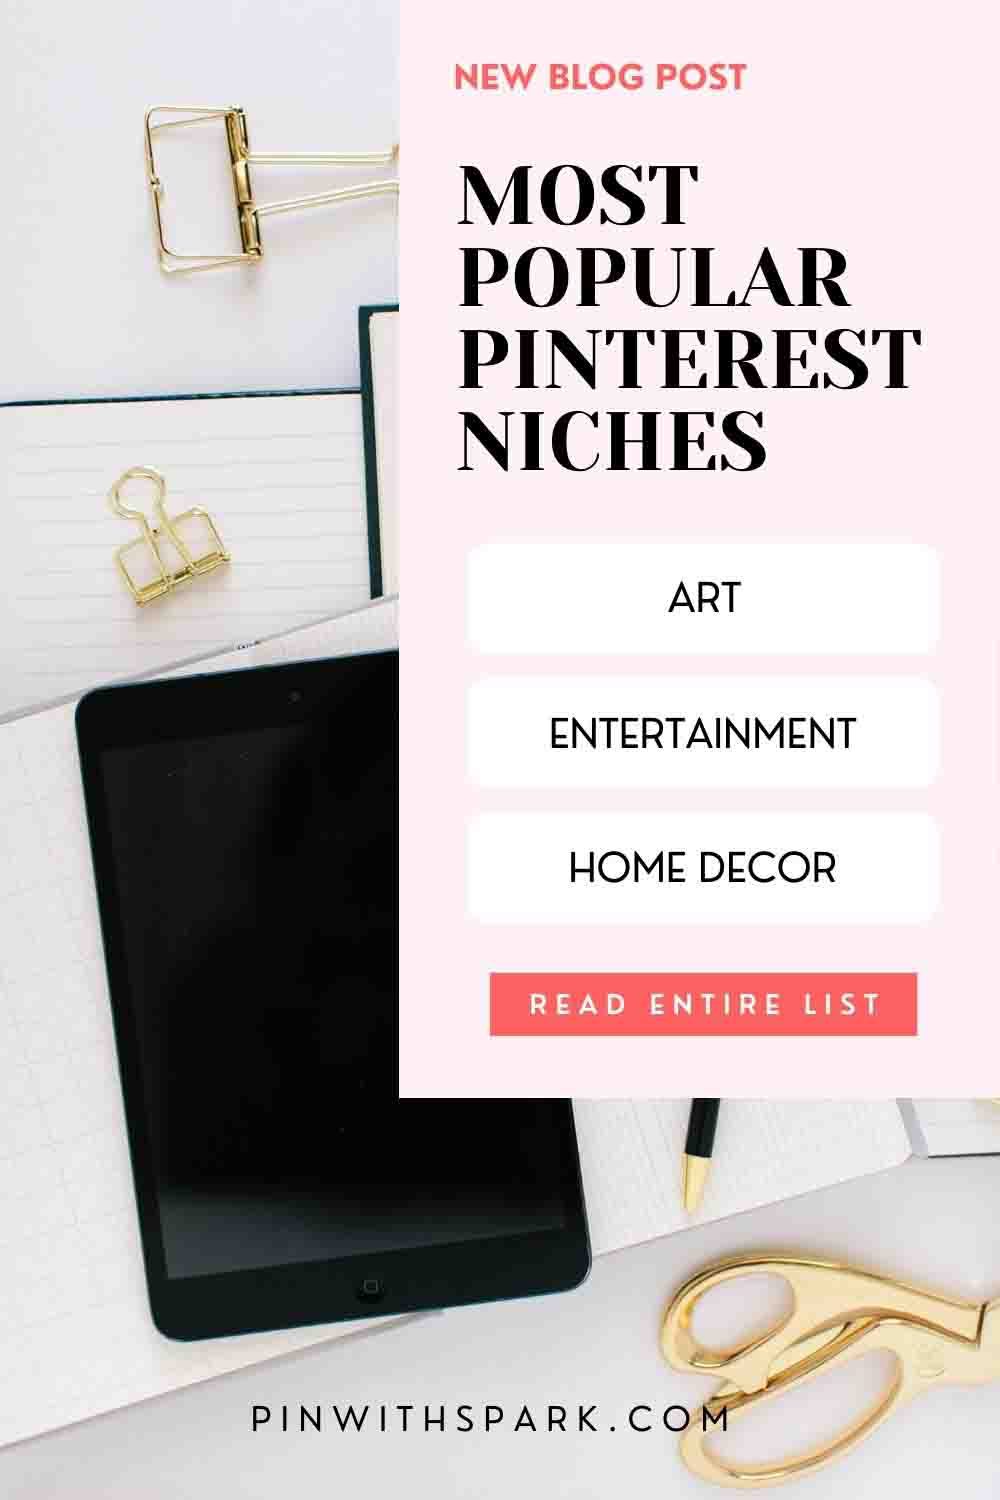 Most popular Pinterest niches text overlay pinwithspark.com